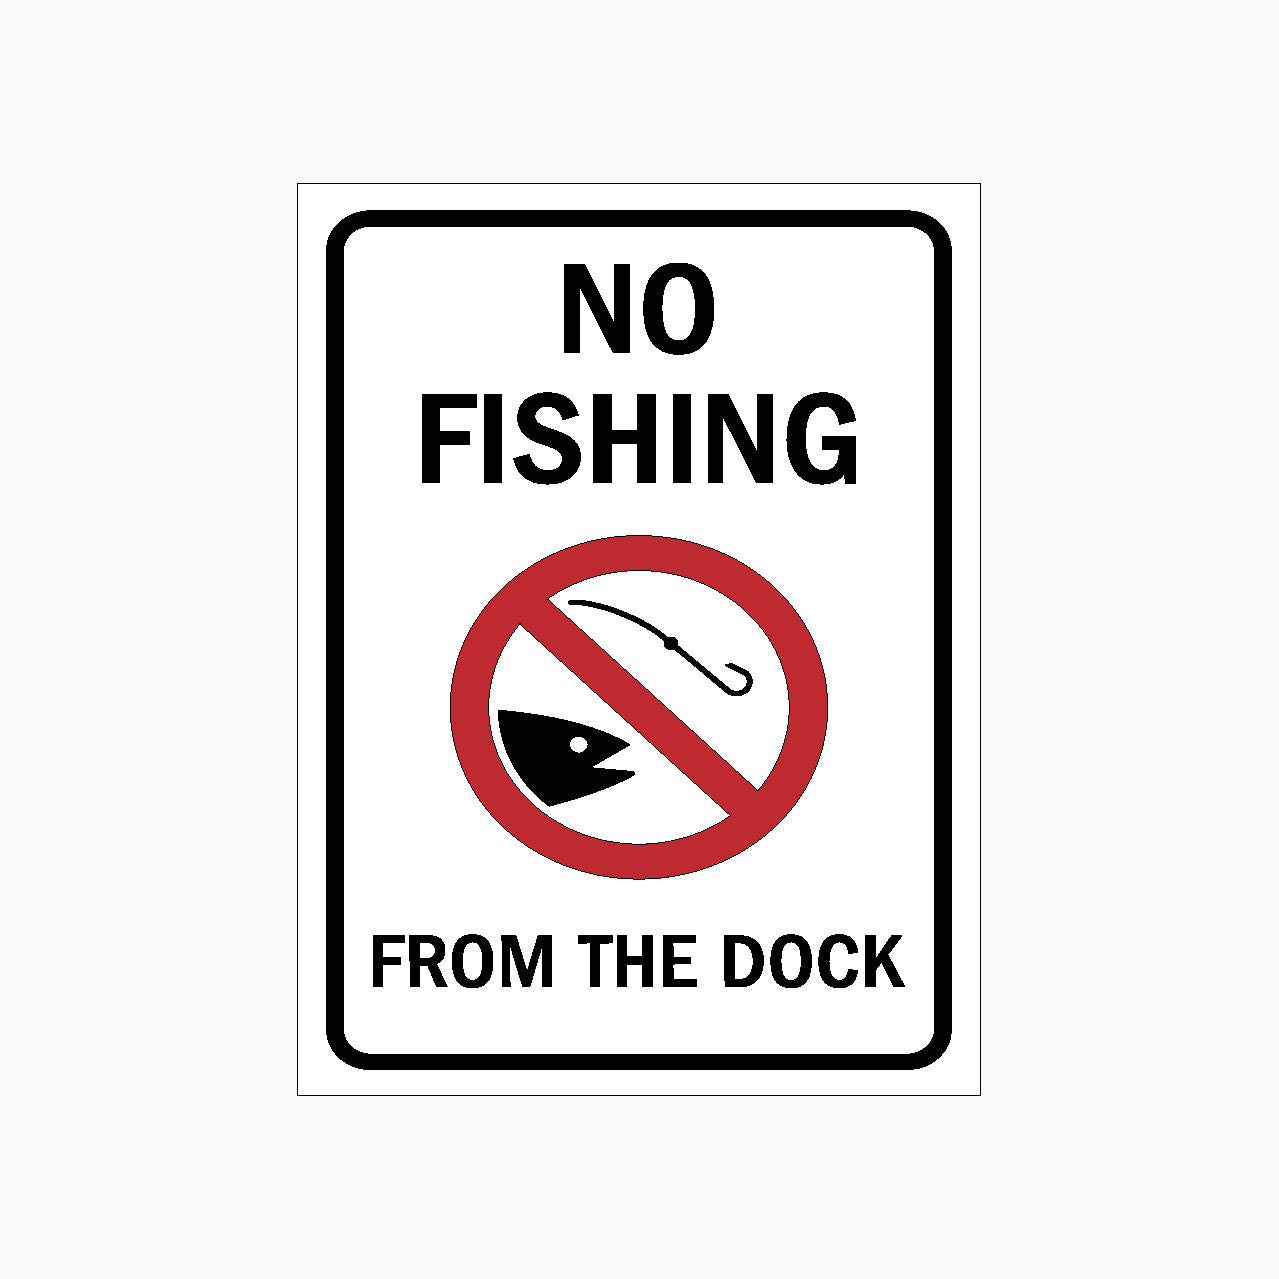 NO FISHING FROM THE DOCK SIGN